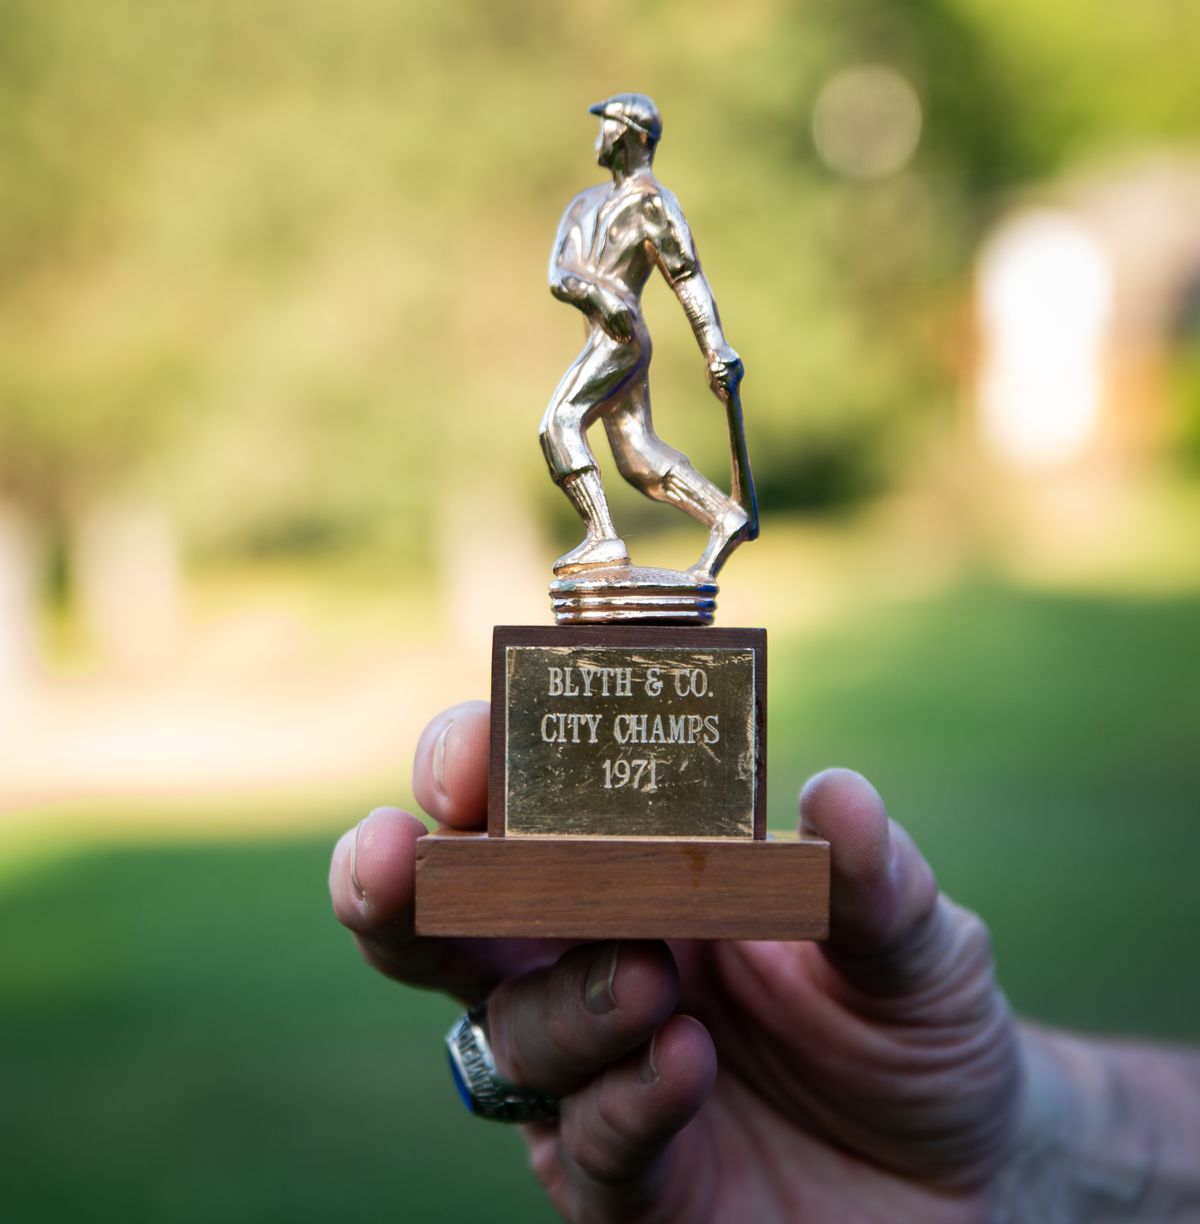 Matt Manning holds up a trophy given to him as part of the 1971 champions Blythe Bullets team at the former home practice playing field, The Resevoir, at 11th and Southeast Boulevard, on July 7, 2021.  (Libby Kamrowski/ THE SPOKESMAN-REVIEW)